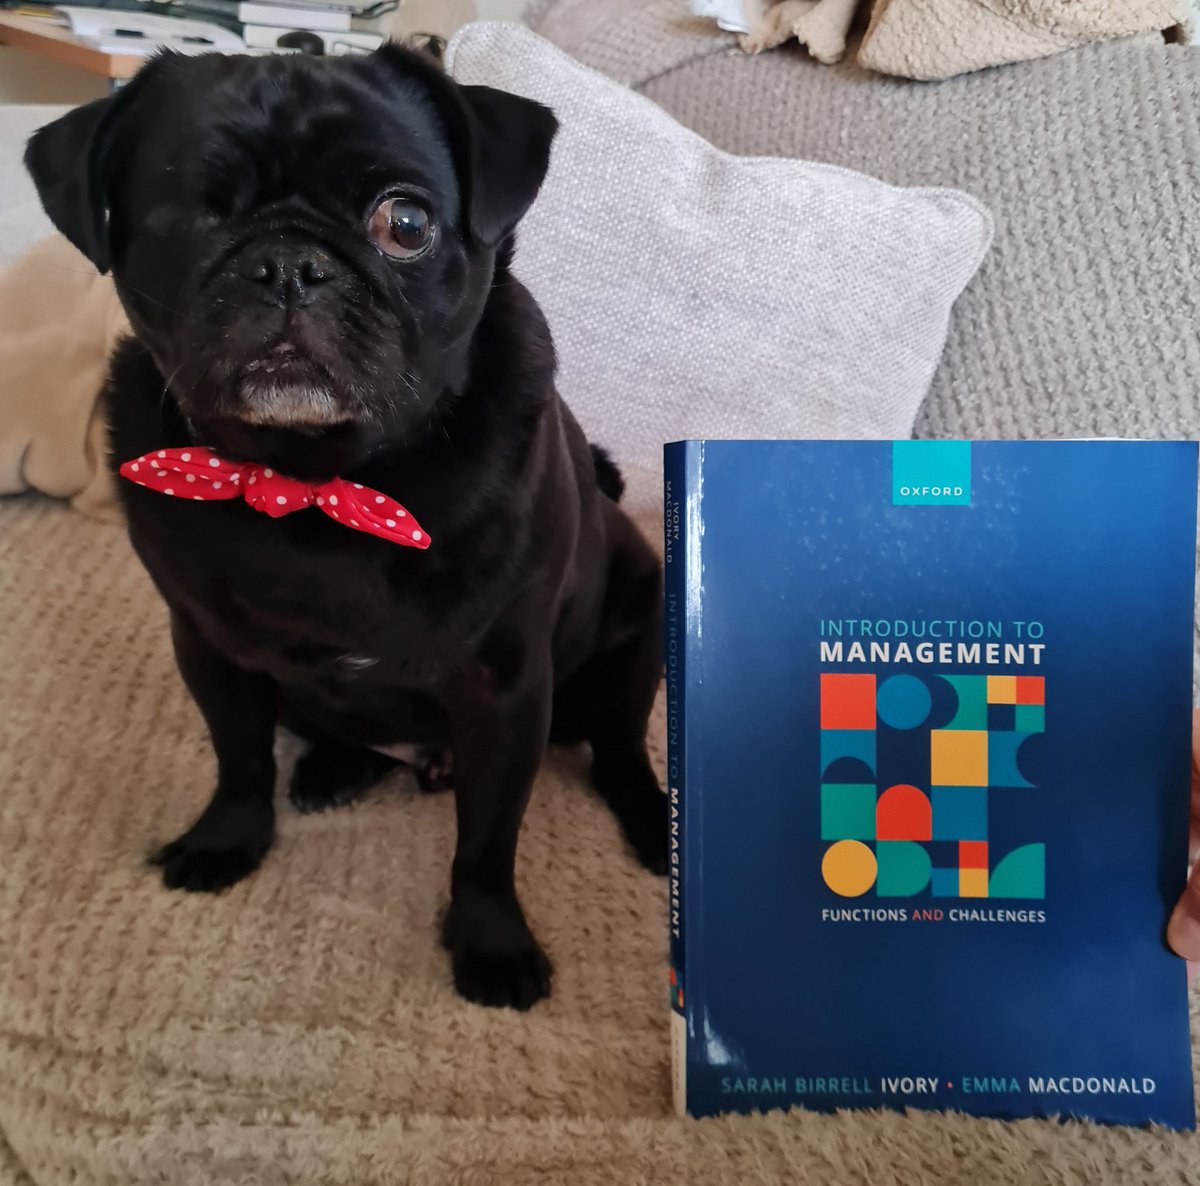 Odin's now got paws on his new copy of Introduction to Management by Sarah Birrell Ivory and Emma K. Macdonald (featuring various chapter contributors, including myself). What more endorsement could you pawssibly need!?